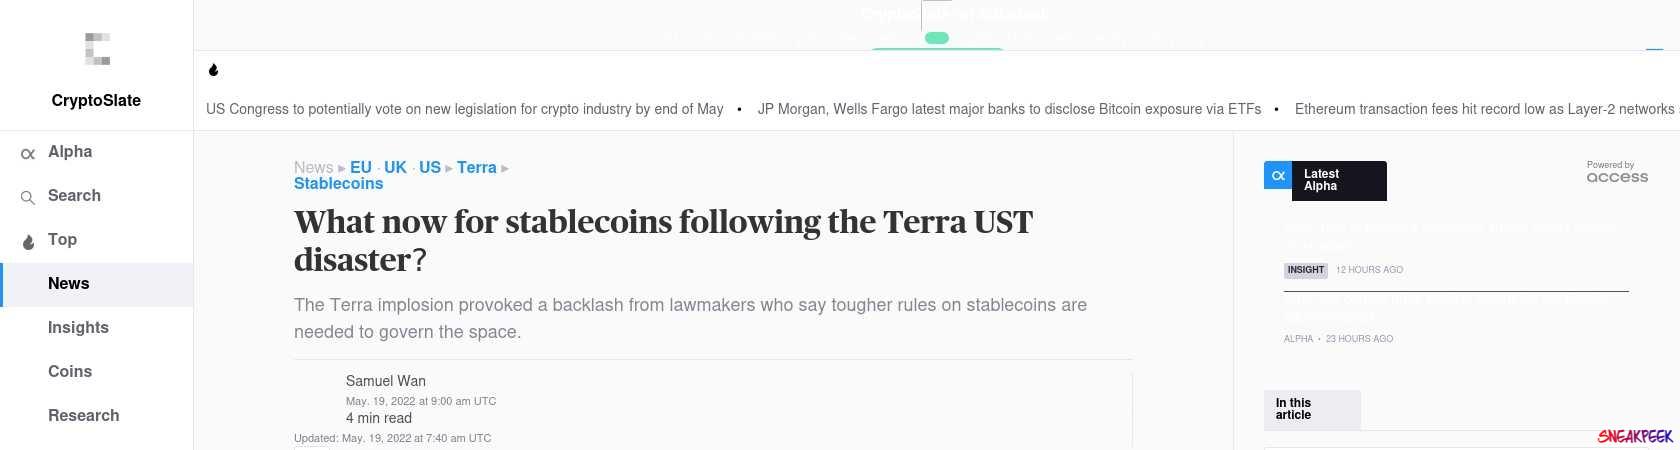 Read the full Article:  ⭲ What now for stablecoins following the Terra UST disaster?